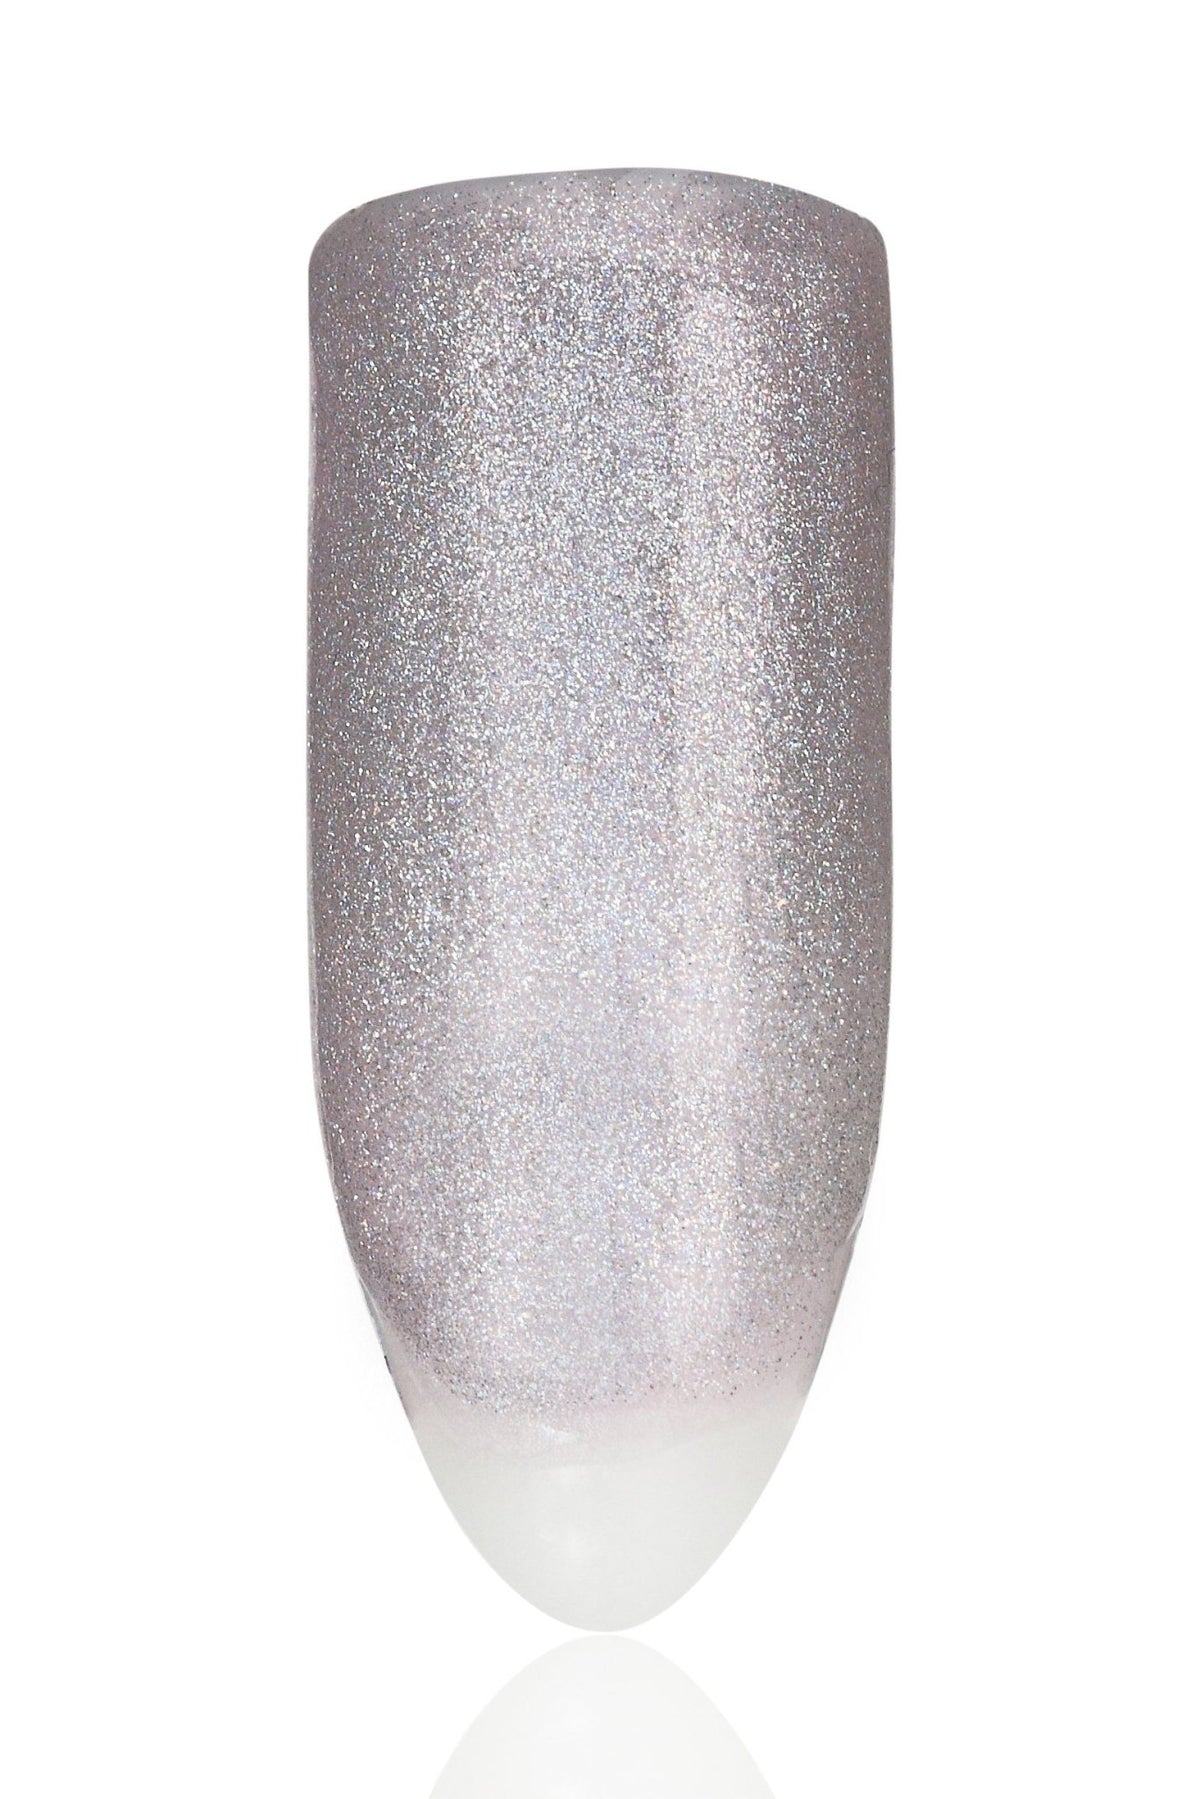 Glitter No Wipe Top Coat | Holographic | #84 - Beauty Hair Products Ltd